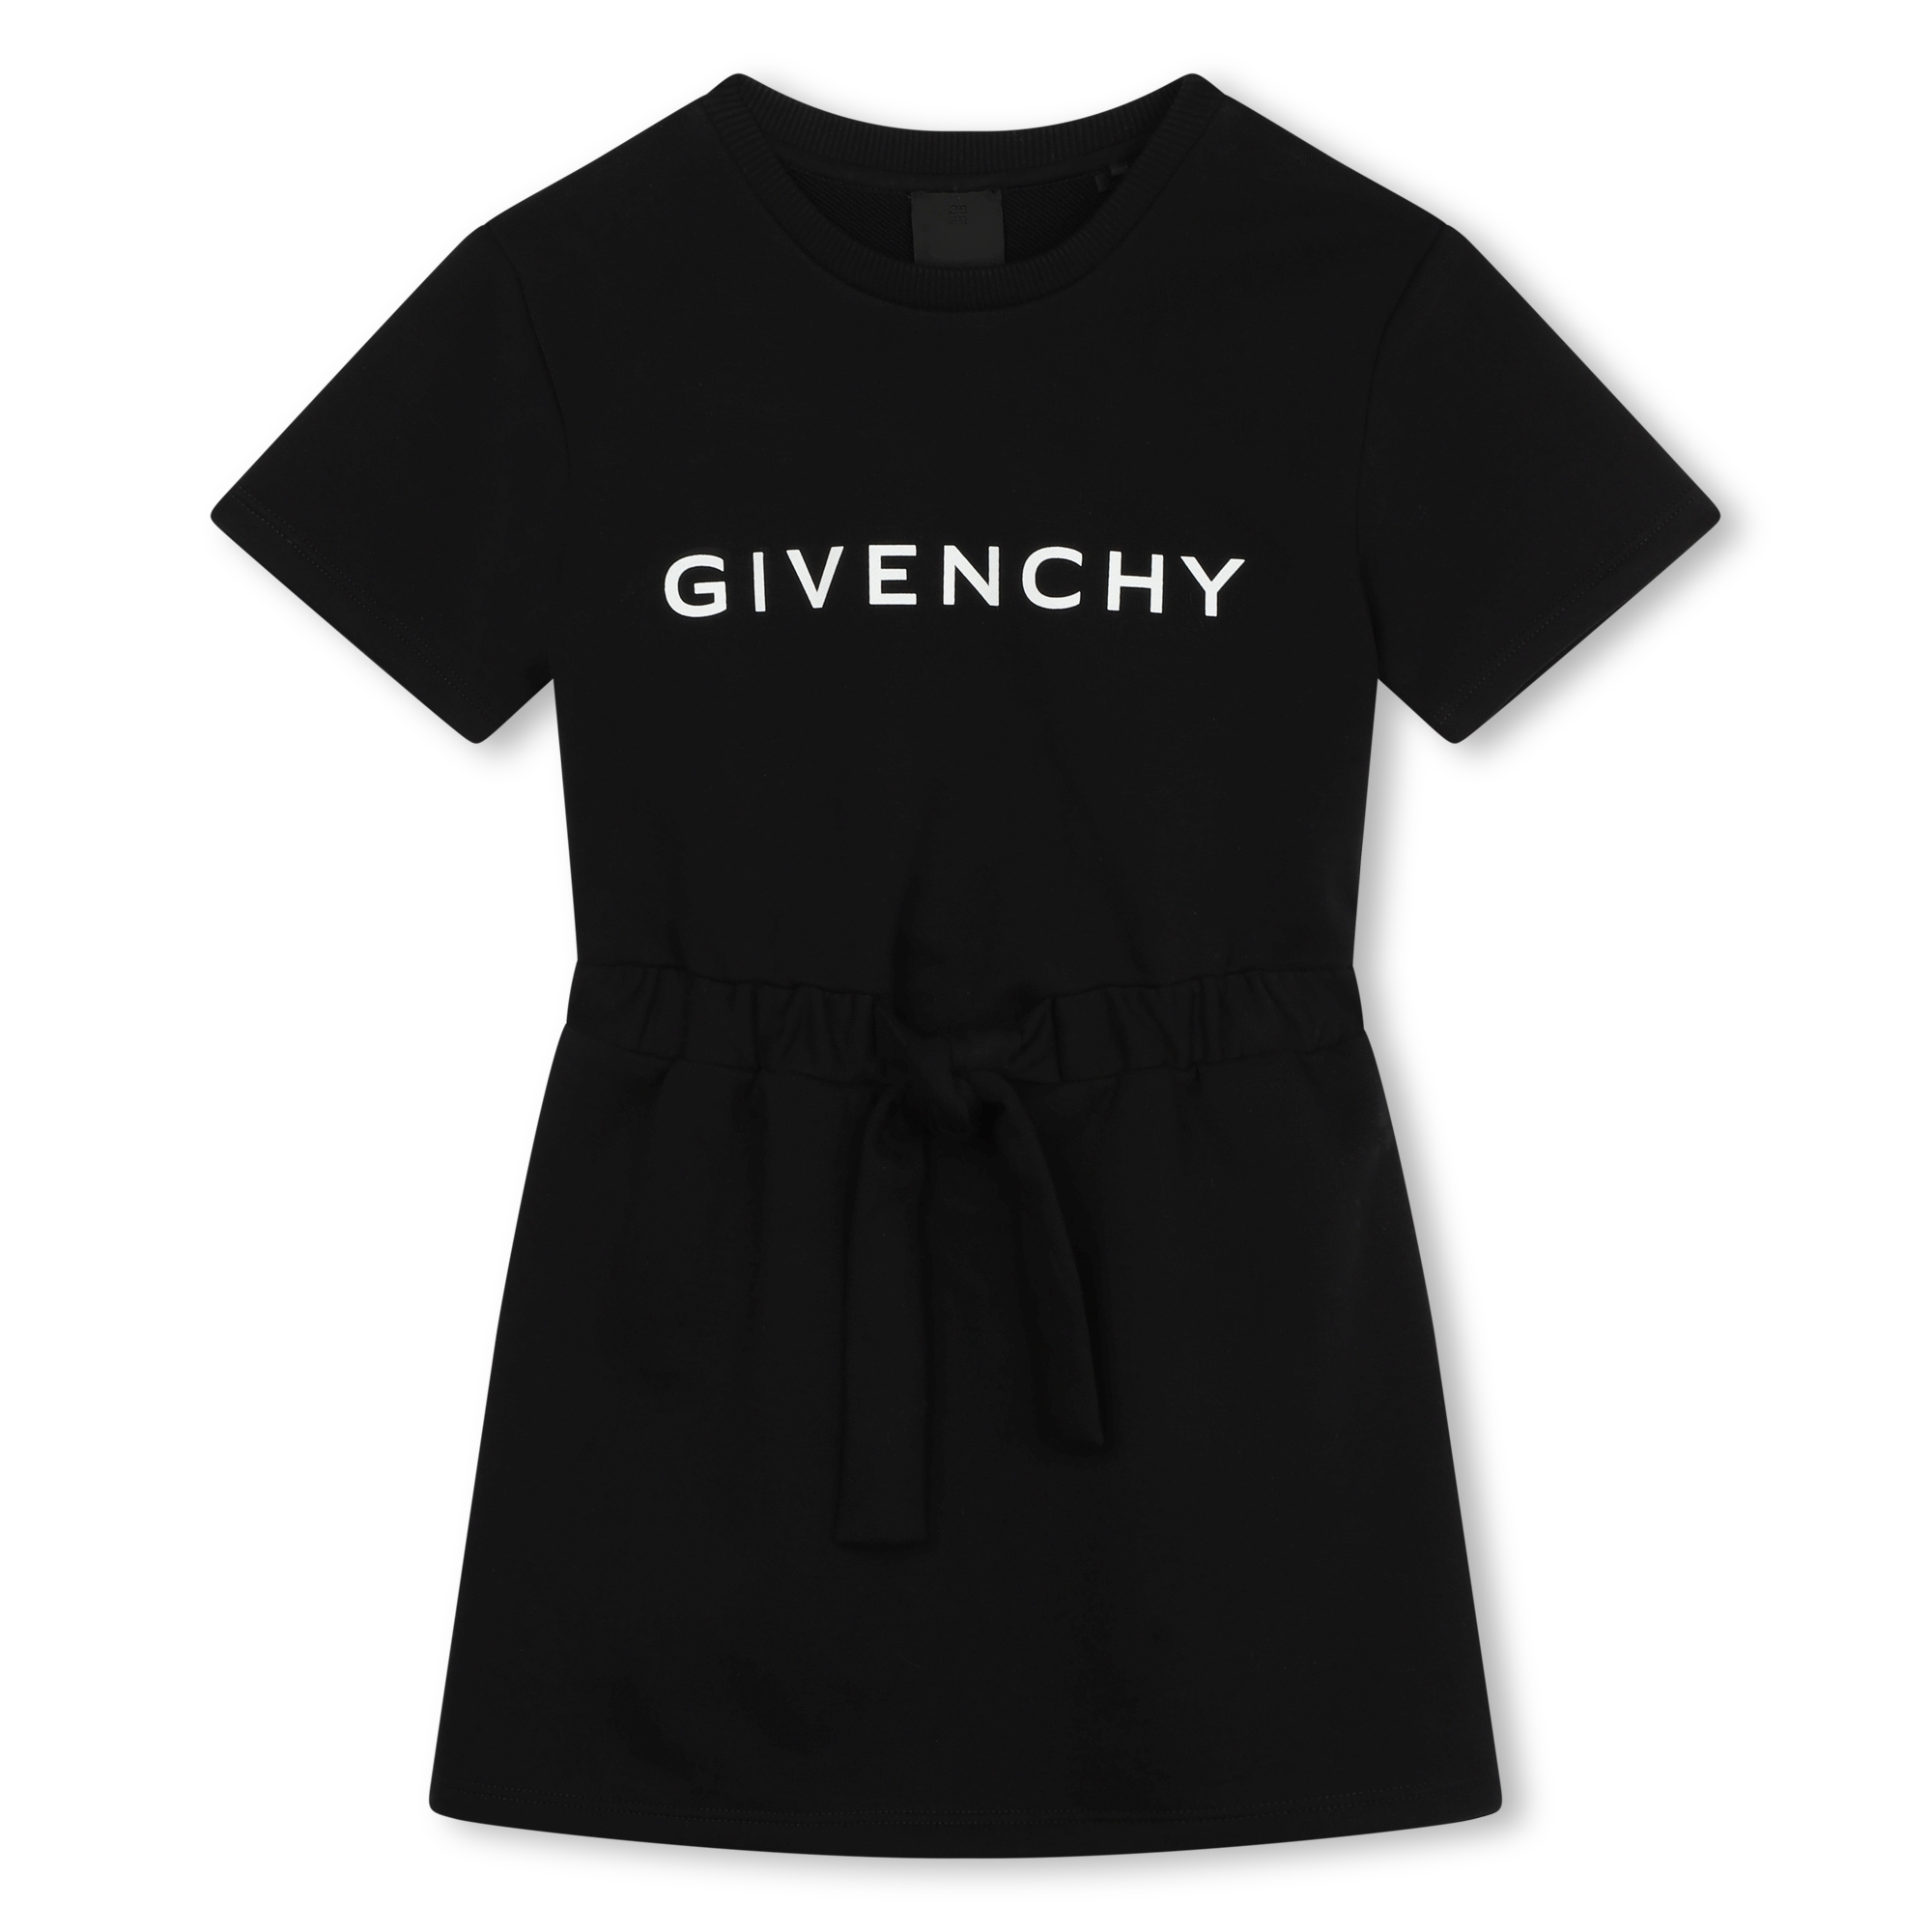 Unbrushed fleece dress GIVENCHY for GIRL